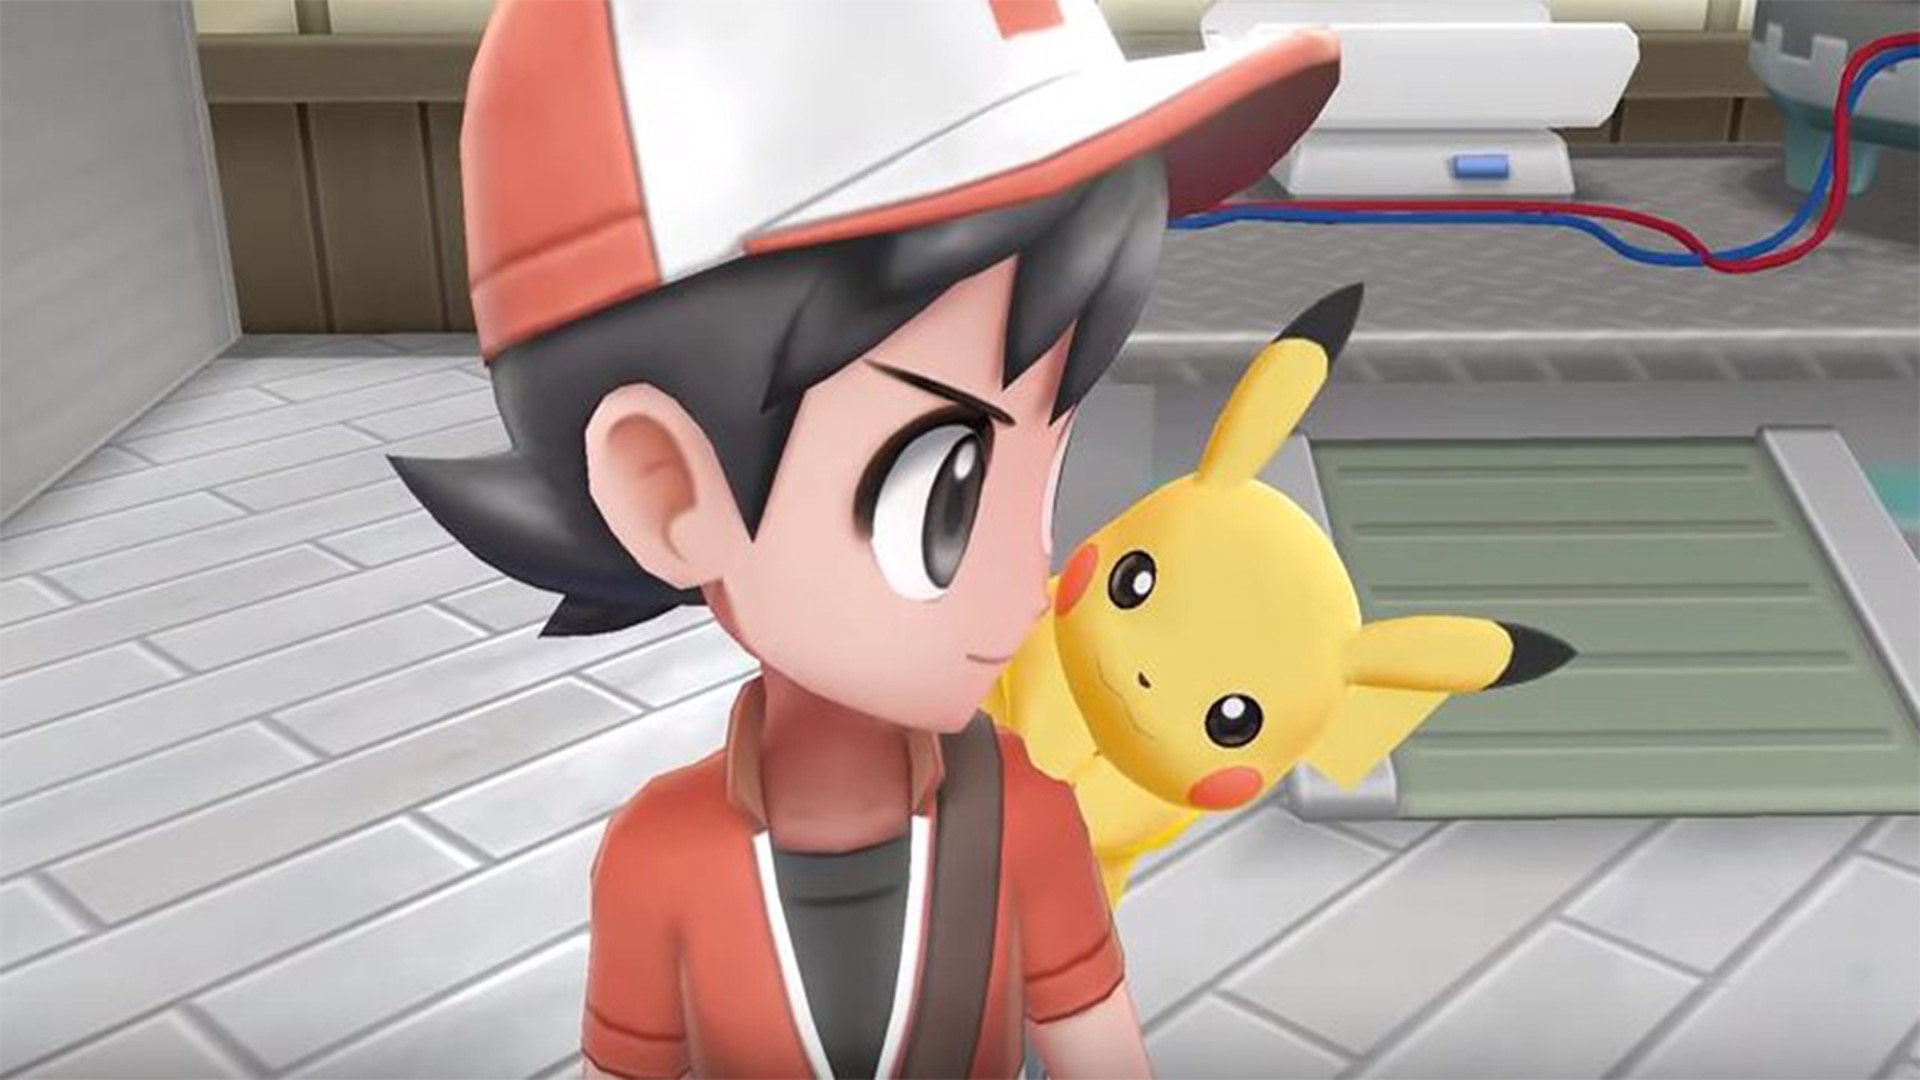 The new ‘Pokémon’ game reveal for the Nintendo Switch will rock your